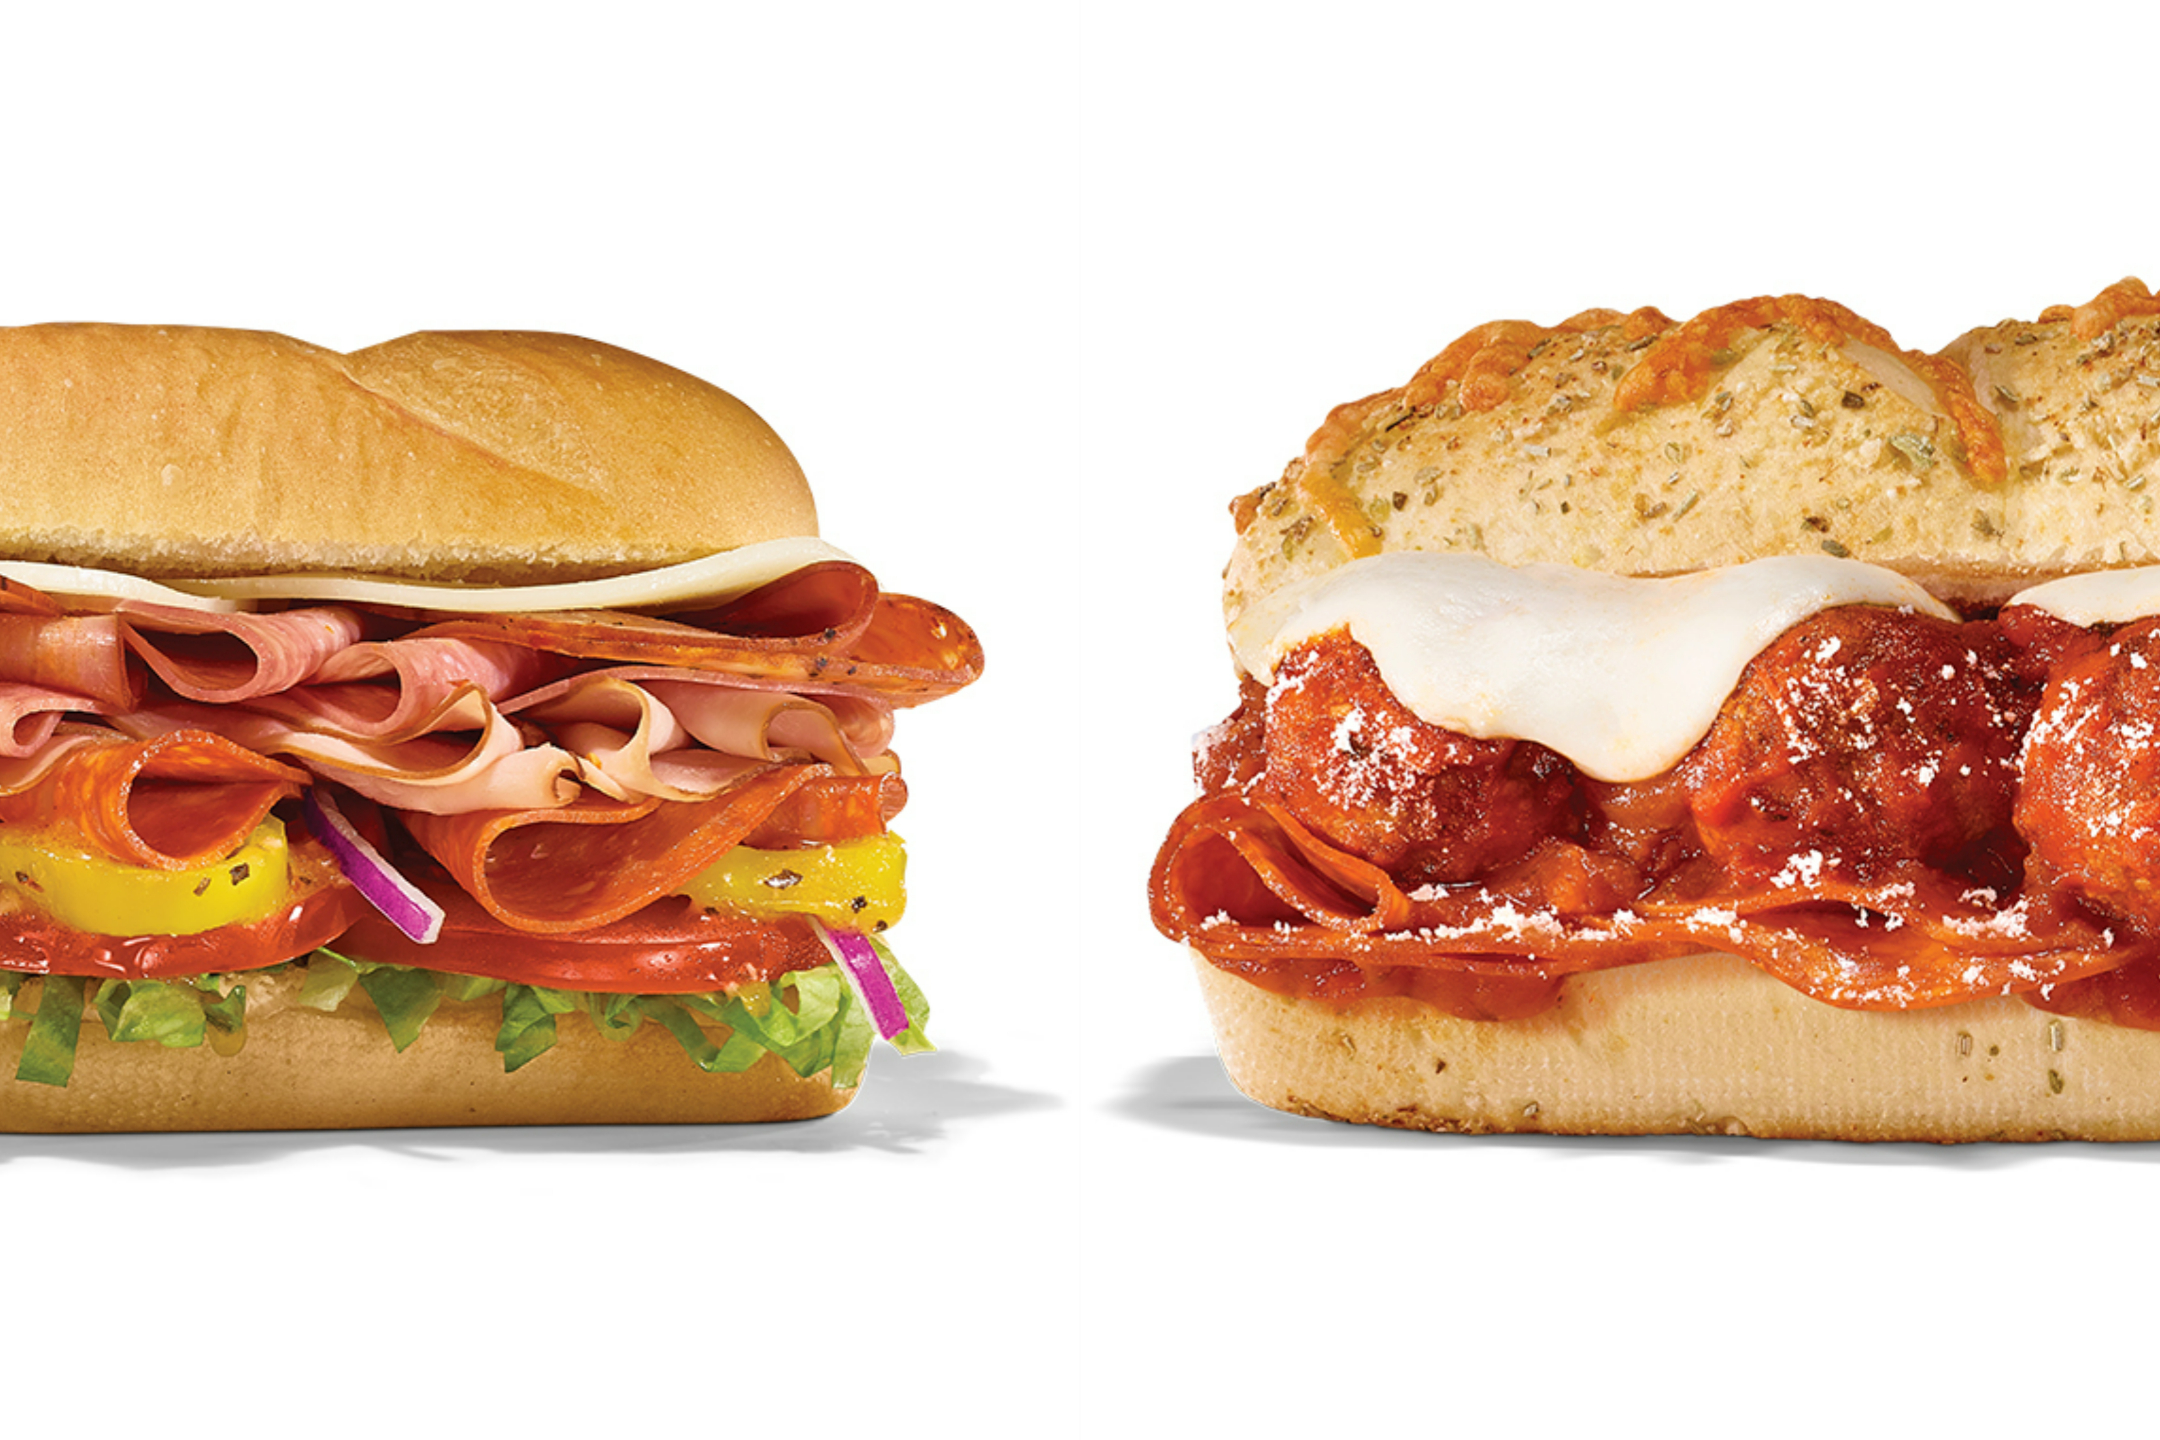 Subway introduces 'The Subway Series' and a whole new way to